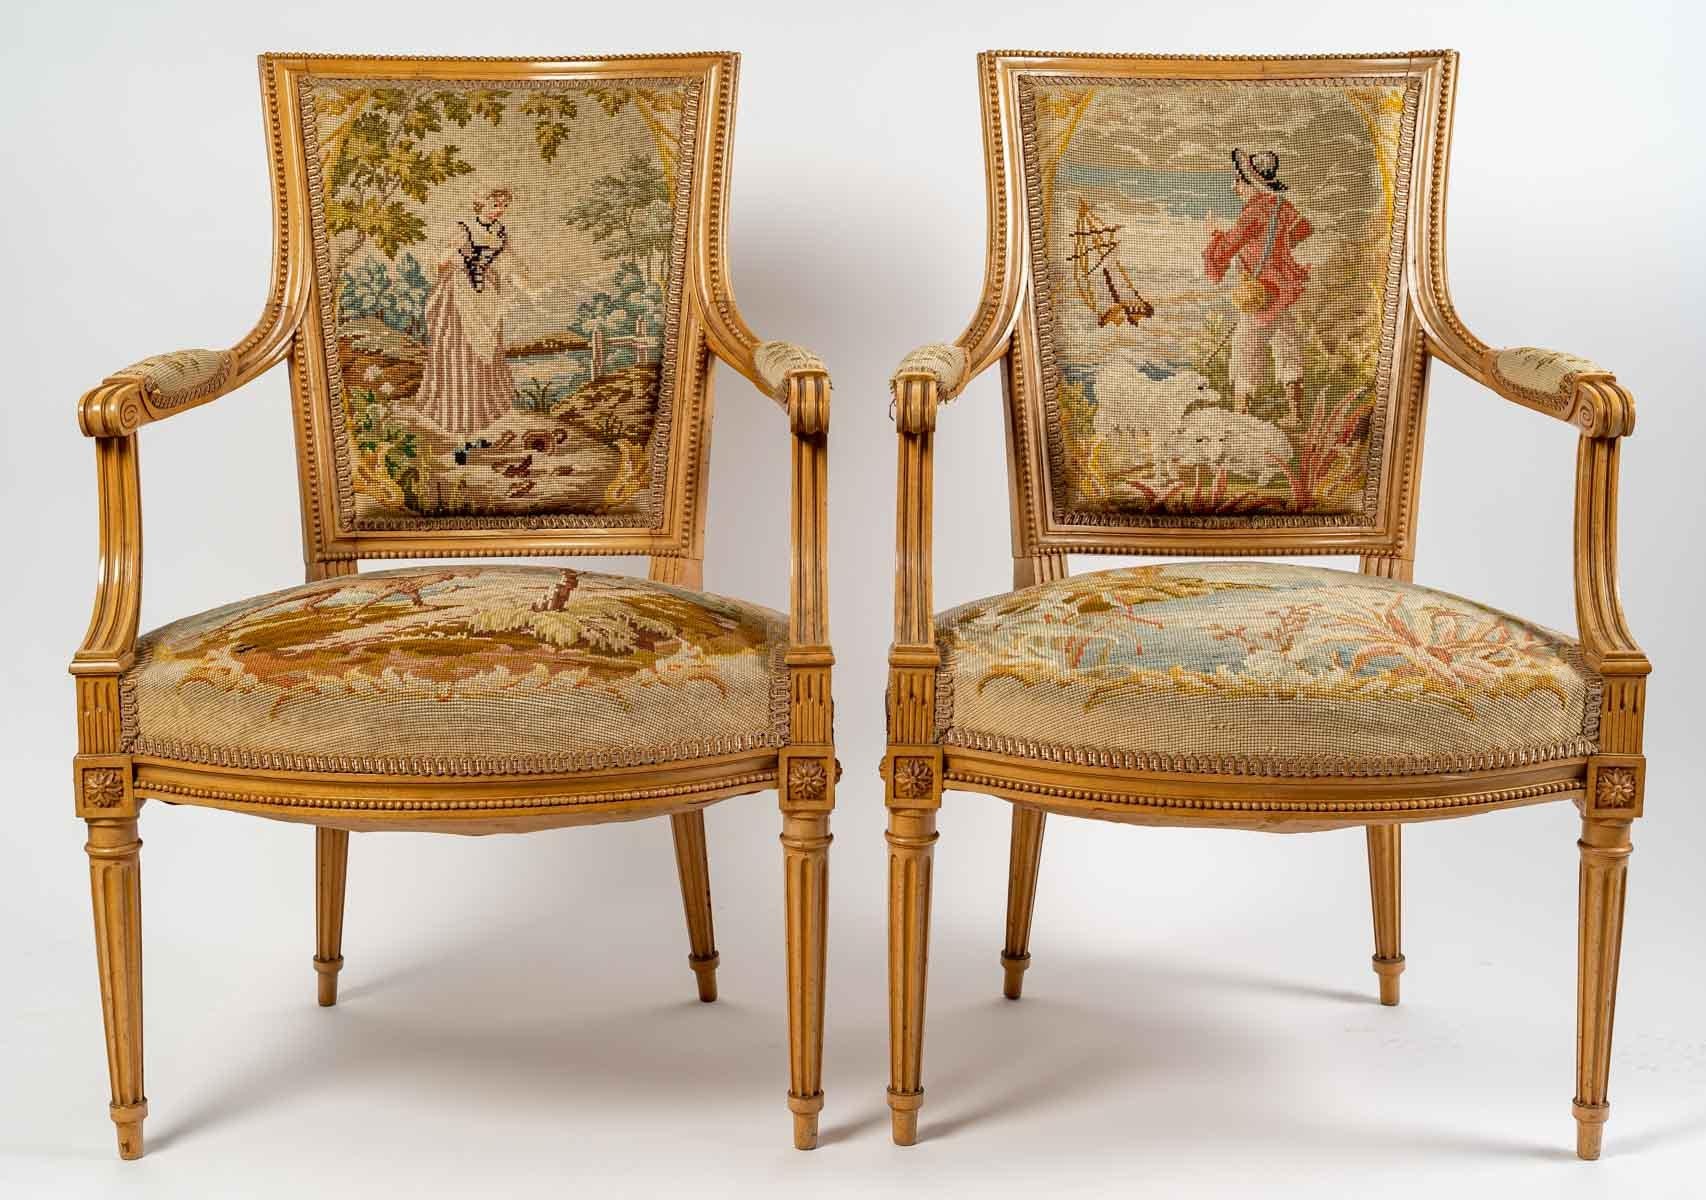 European Pair of Cabriolet Armchairs in the Louis XVI Style, Sycamore Wood